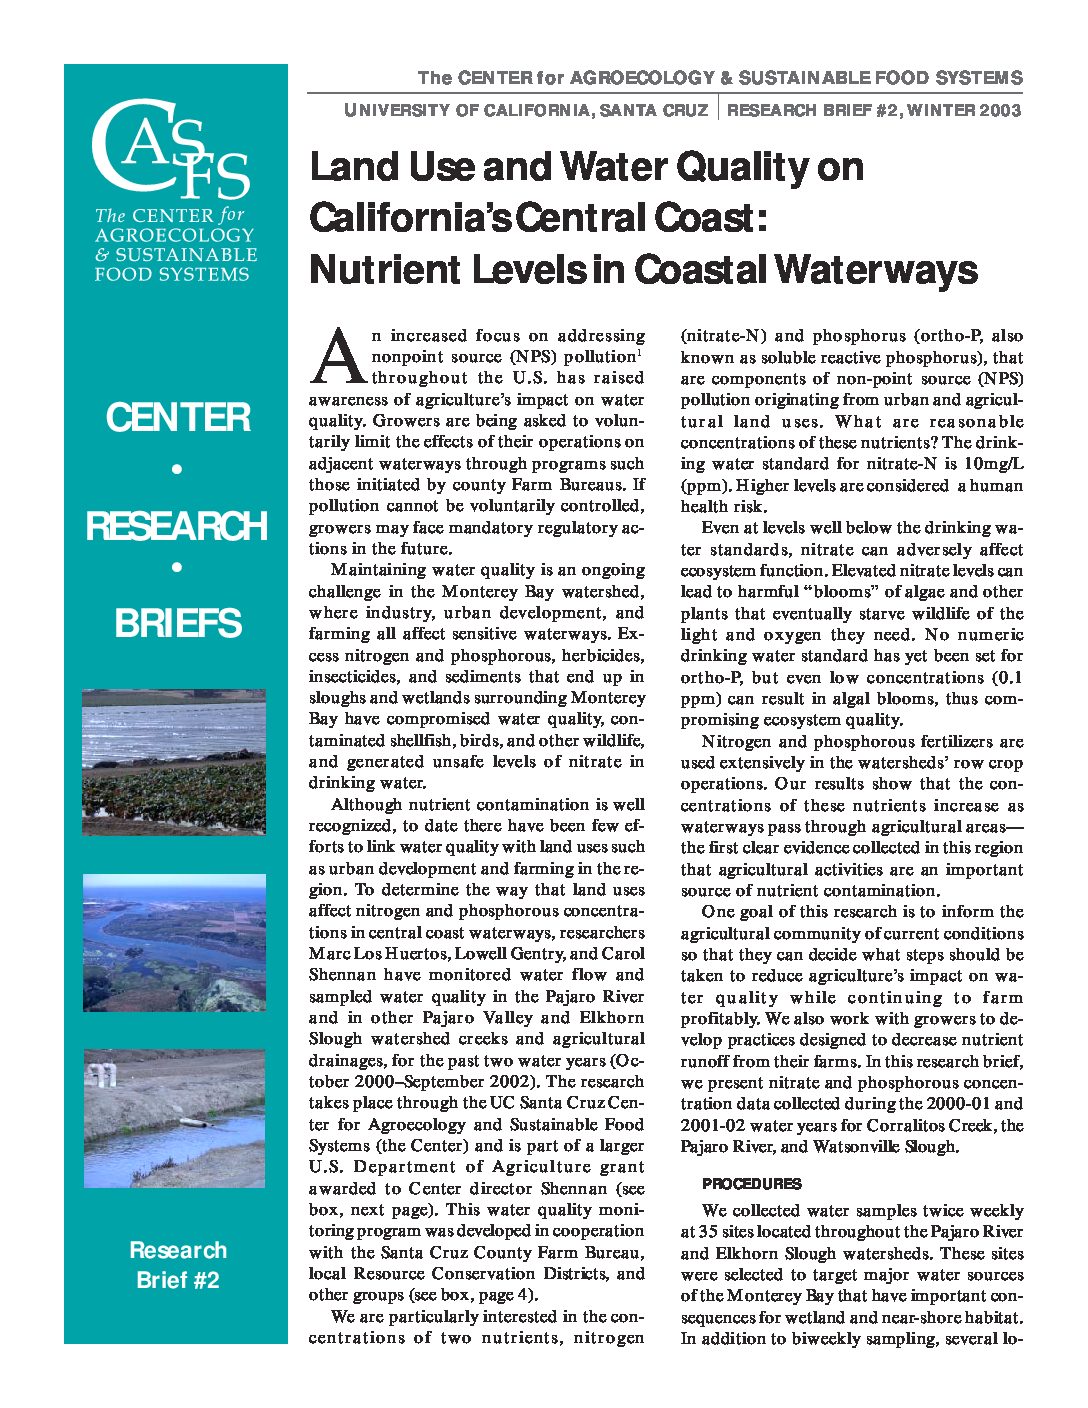 Land Use and Water Quality on California’s Central Coast: Nutrient Levels in Coastal Waterways